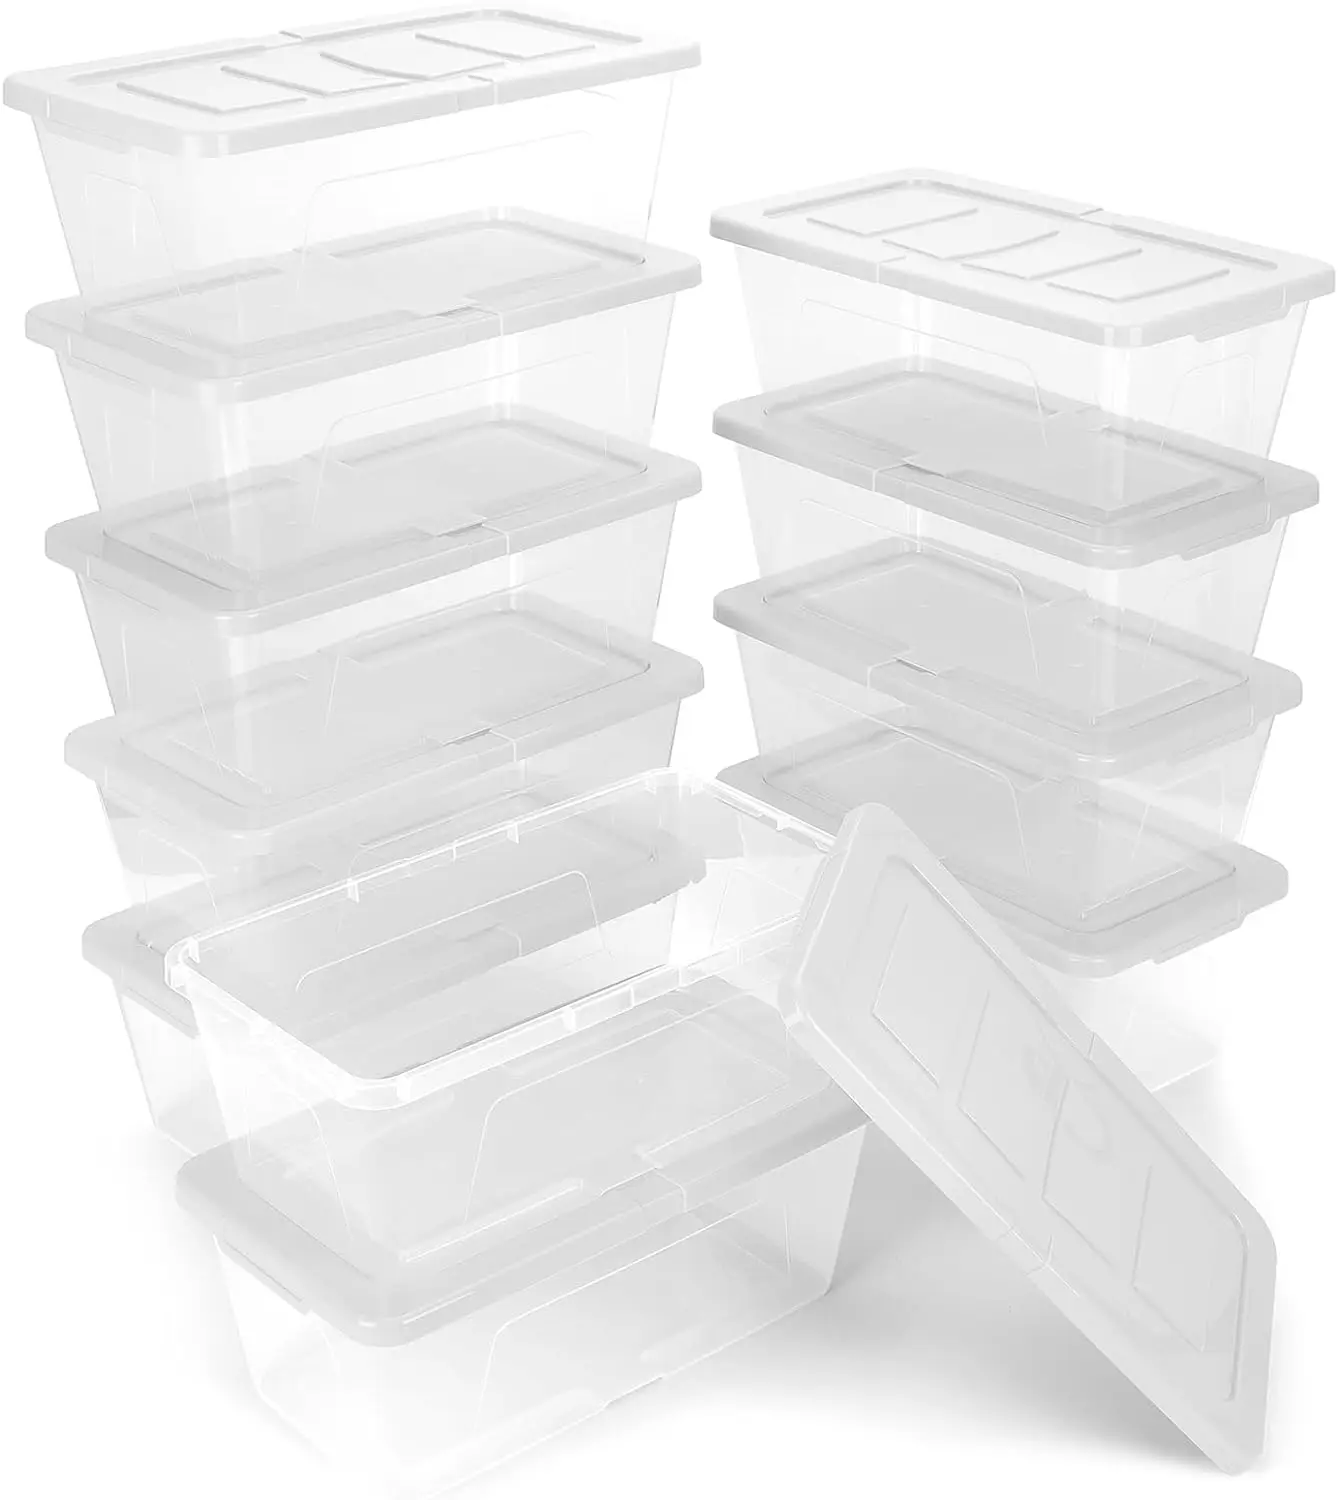 

12 Pack Plastic Storage Container w/ Snap Lids, Stackable Shoe Organizer Boxes Storage Baskets for Organizing Closet Organizers